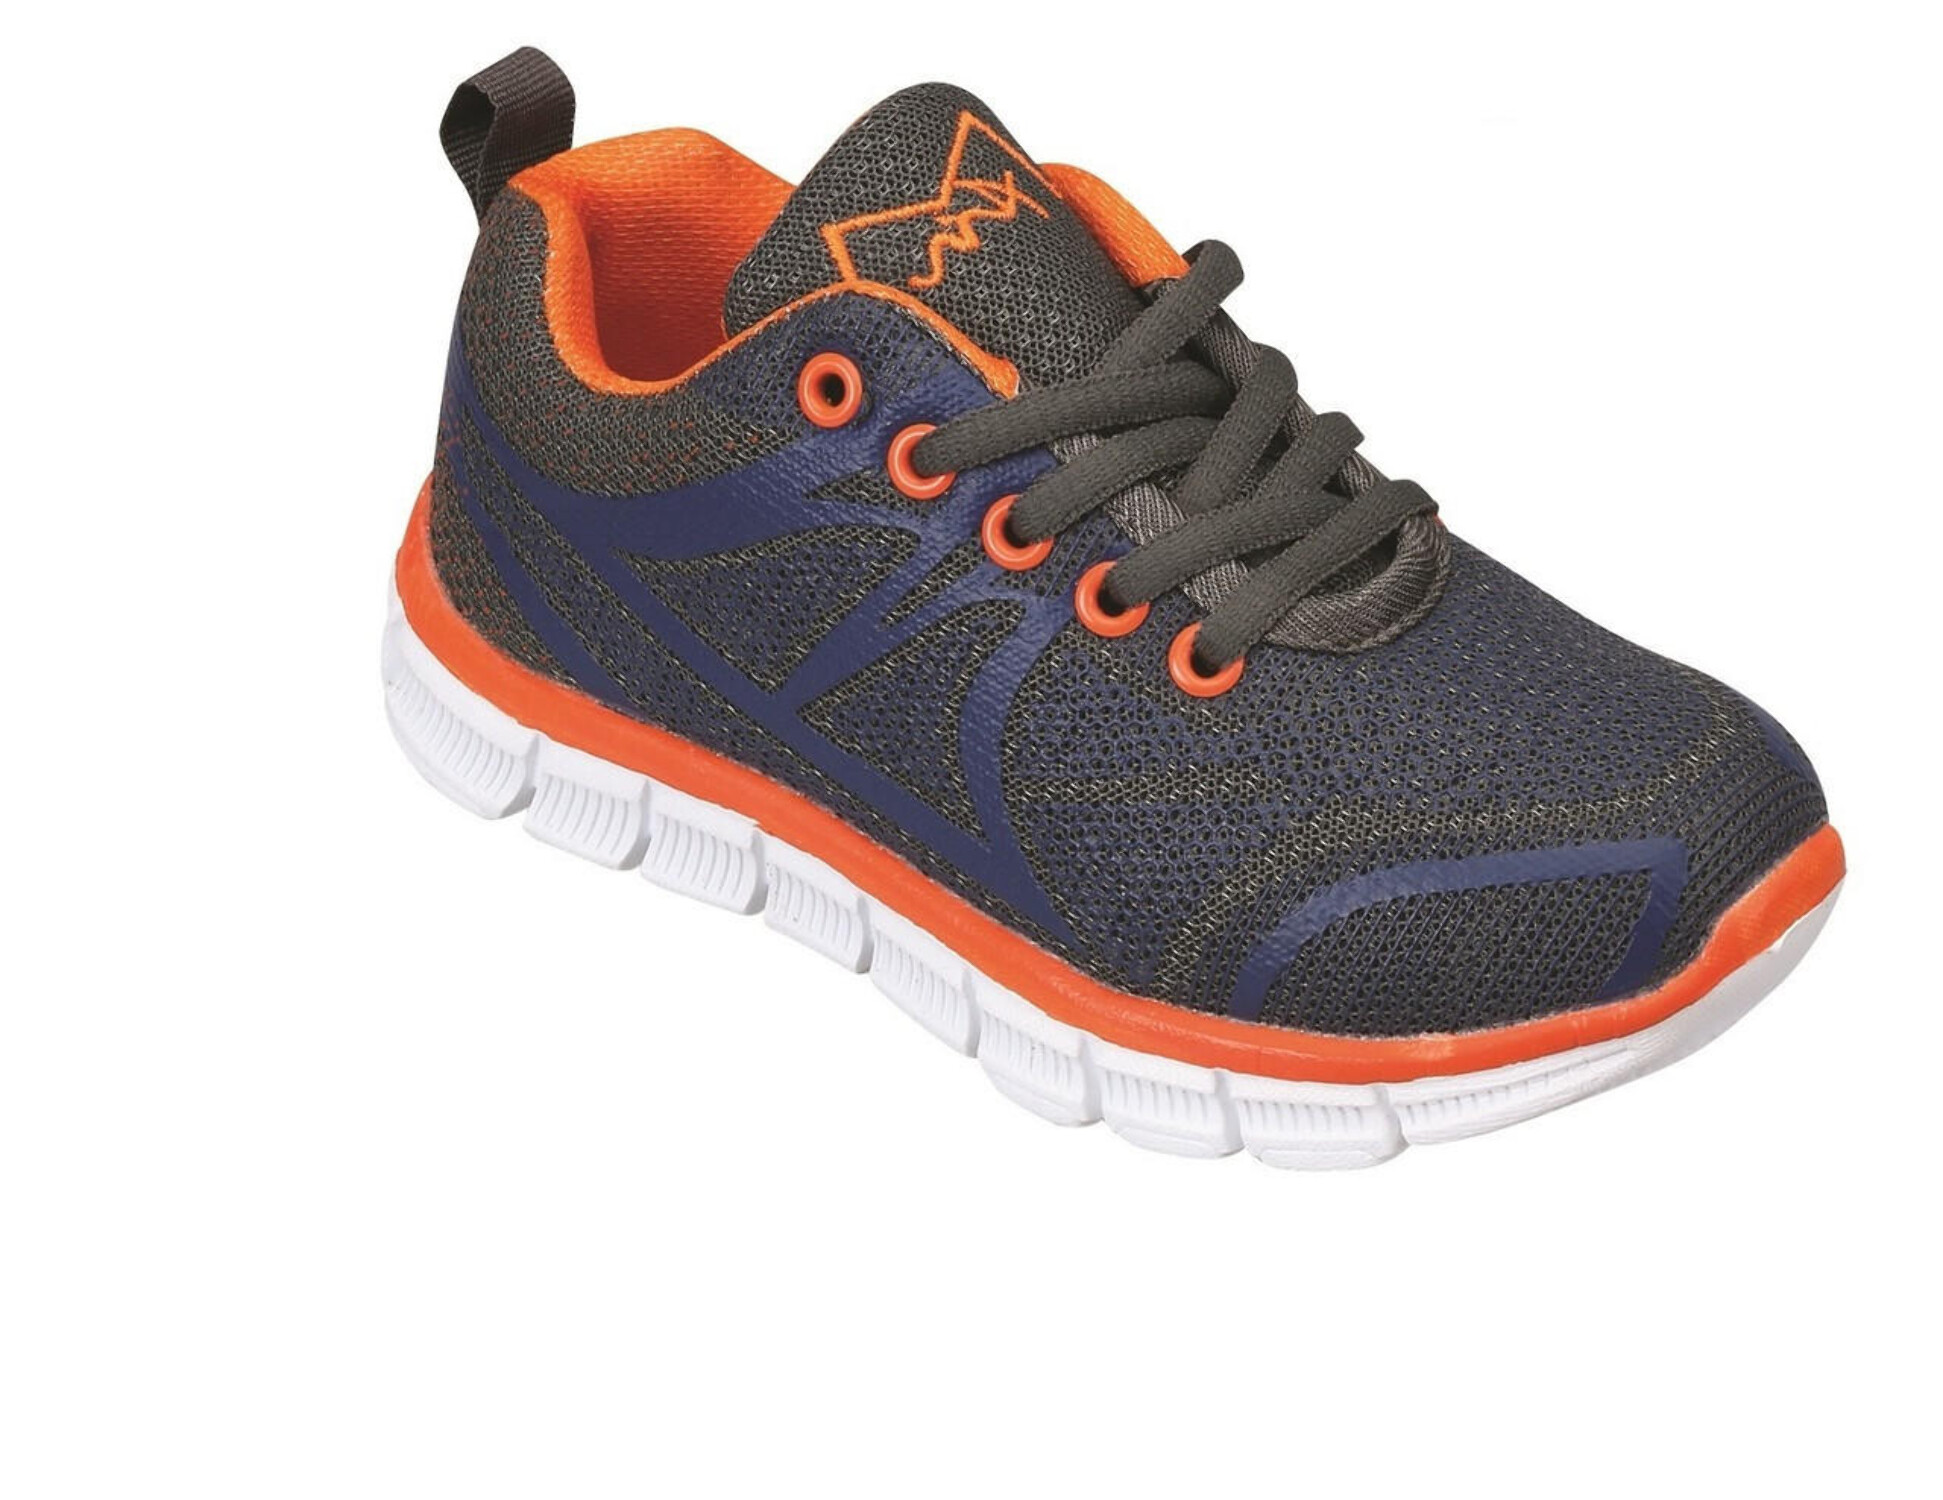 MAIR Kids Ultra Lightweight PACER Athletic Sneaker Shoe - image 2 of 4